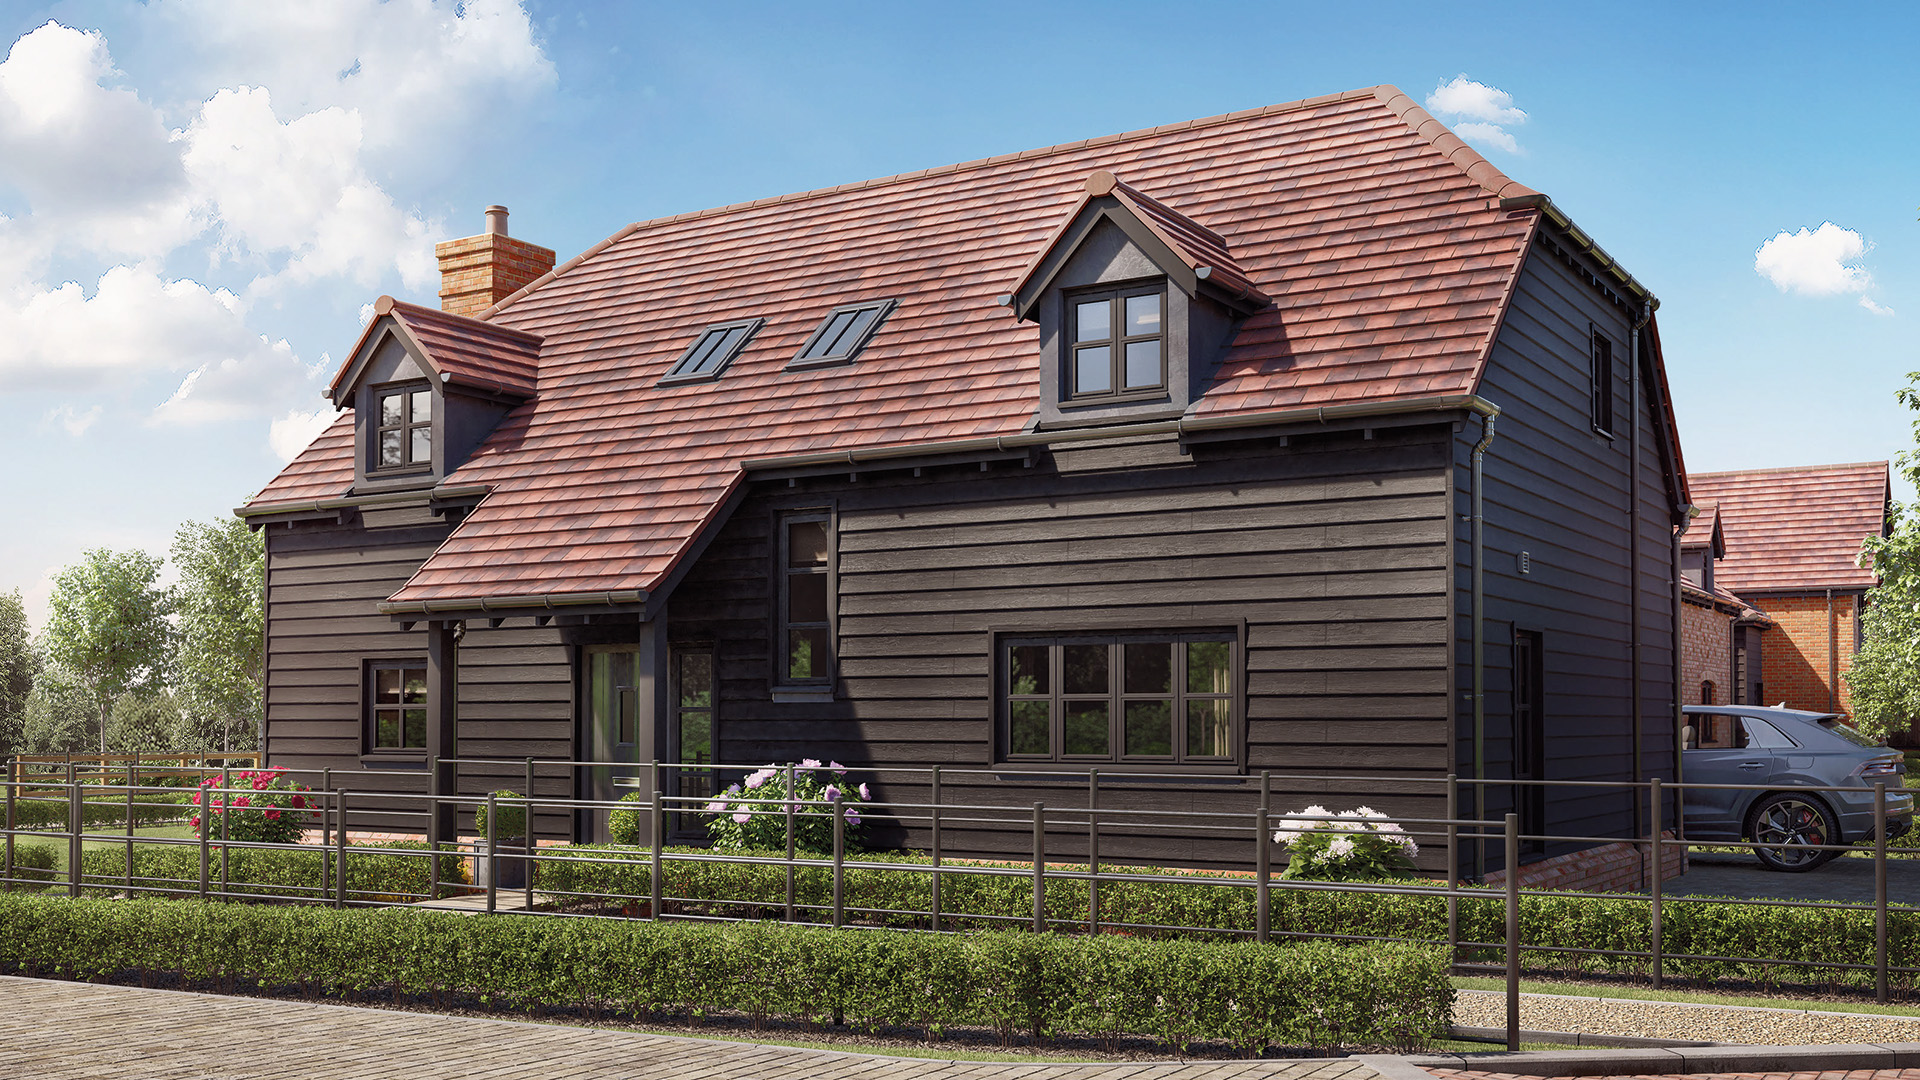 Curlew Lodge - New houses in Buckinghamshire